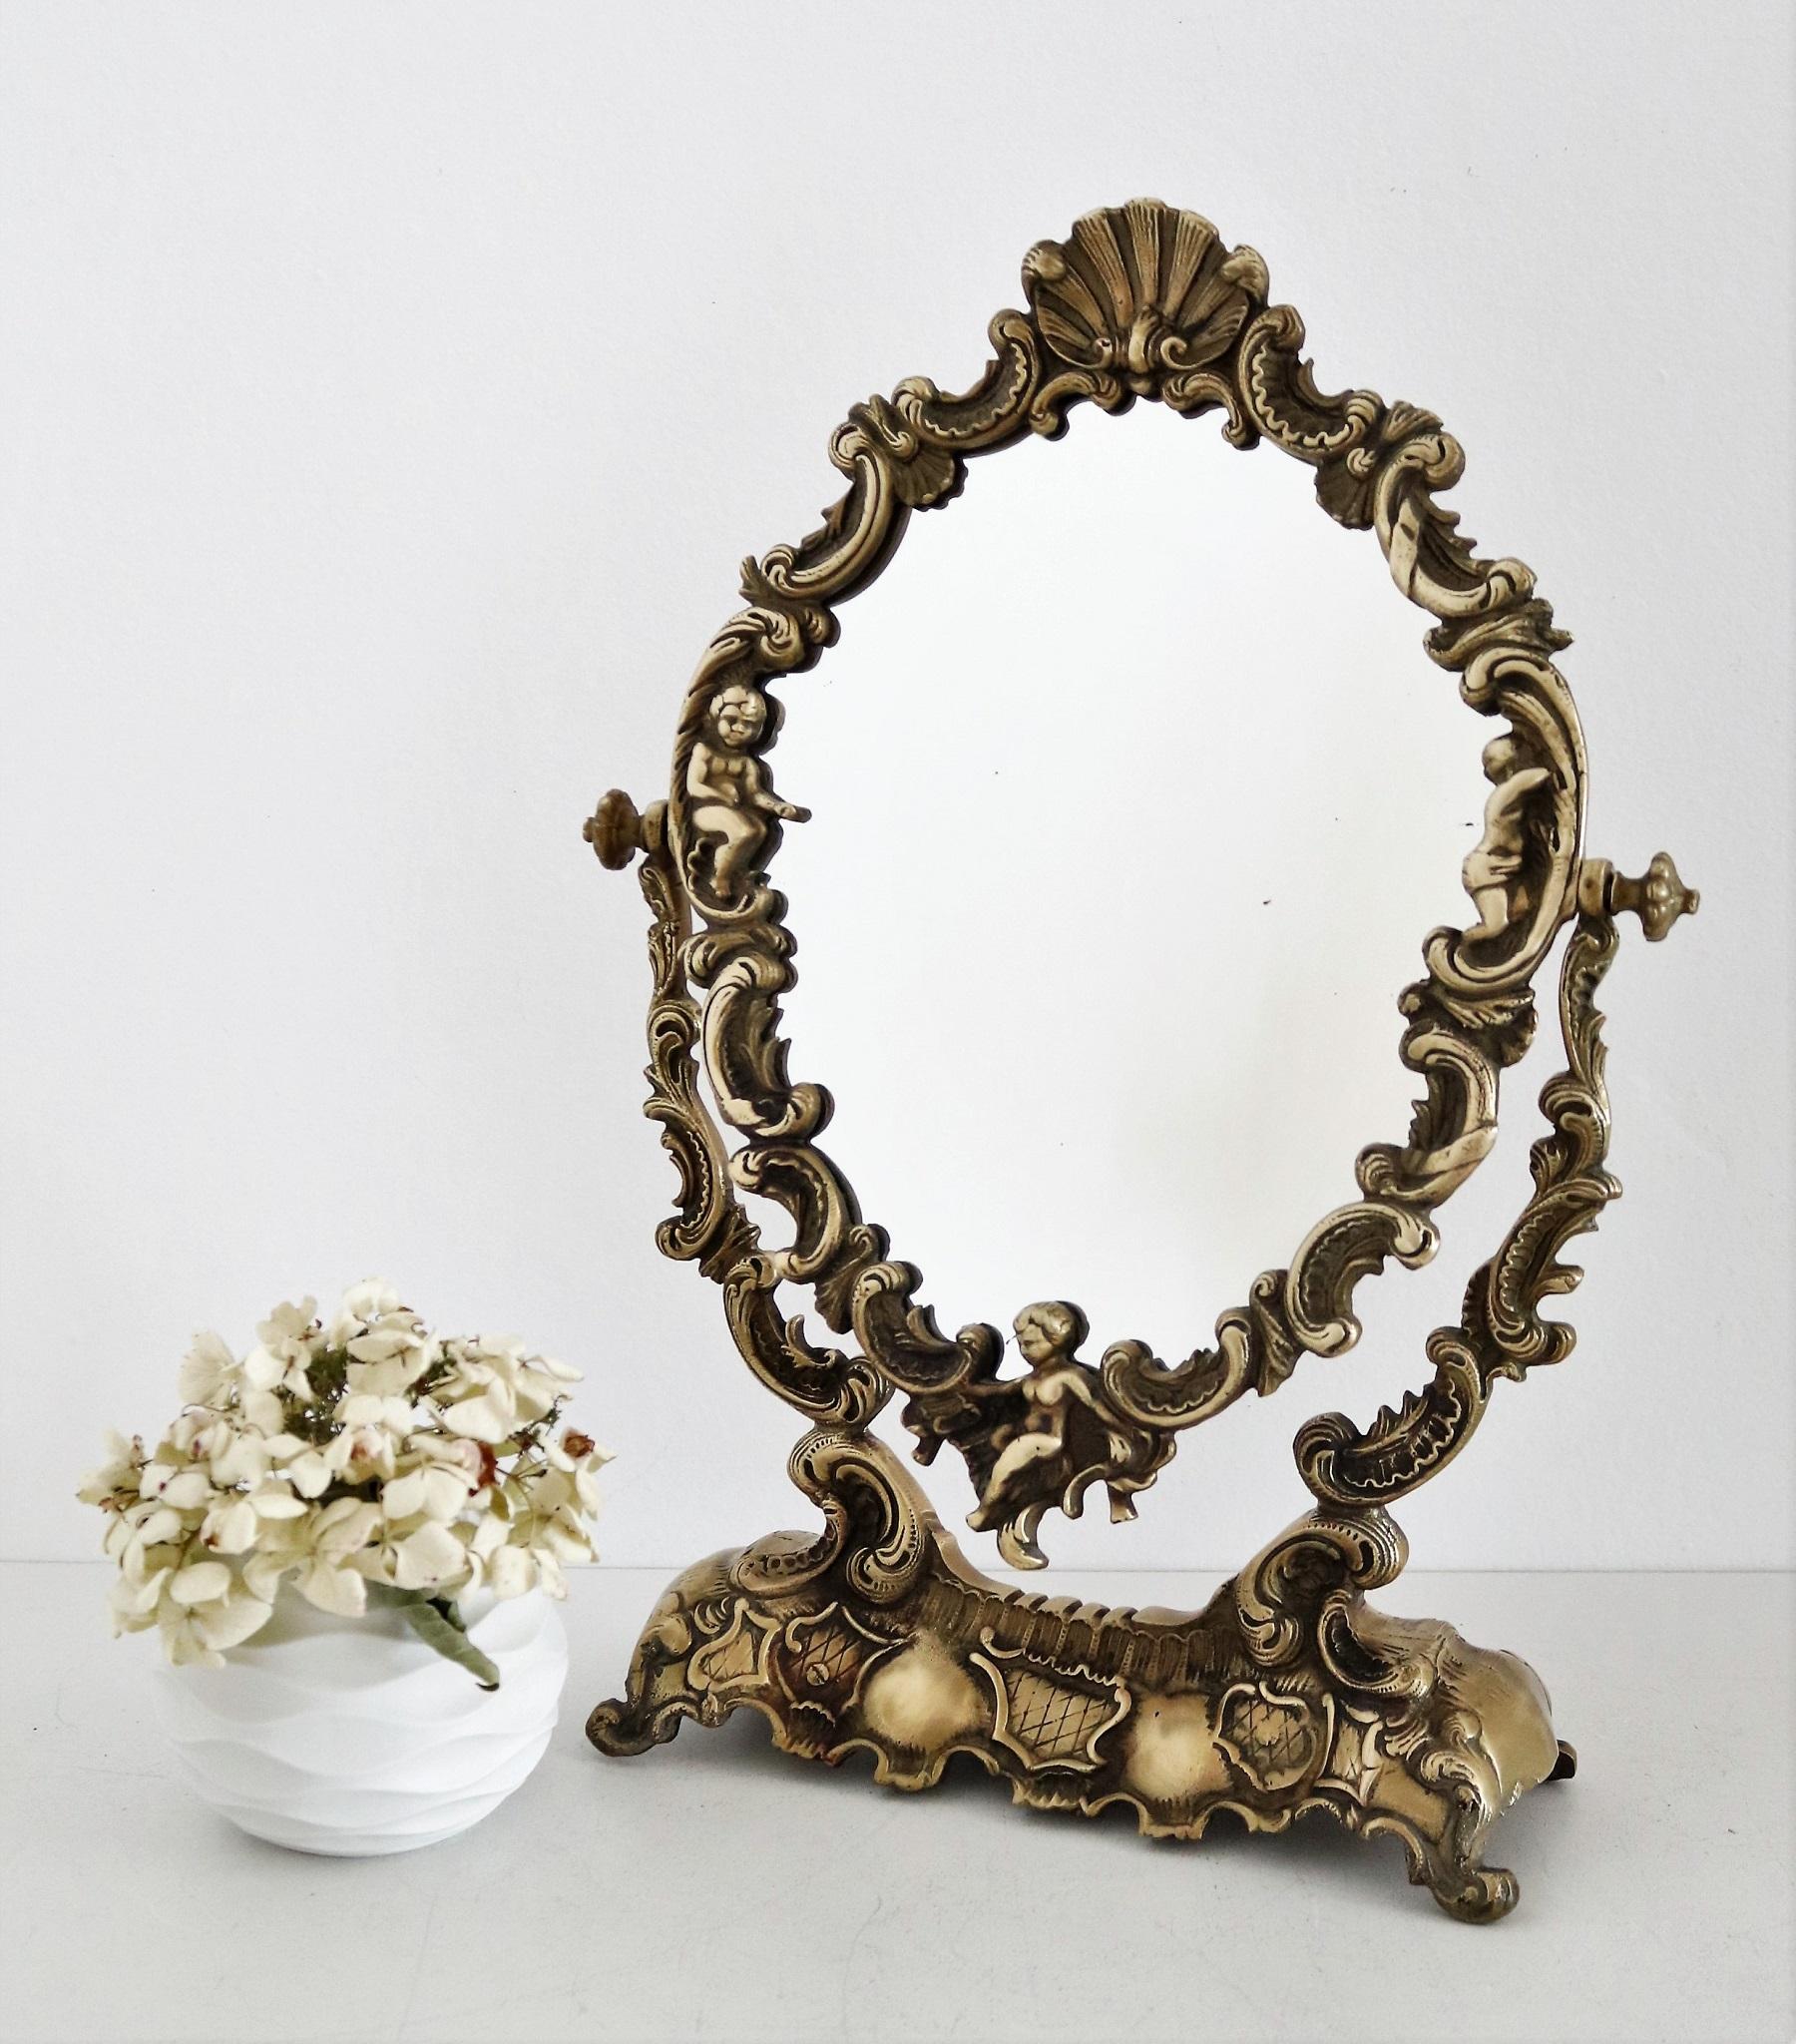 Gorgeous dressing table mirror in heavy full bronze, showing angels (putti) and shells in the frame.
Made in Italy in the mid-century.
The framed mirror glass is attached to the base with two screws, and can be rotated to any position.
The back